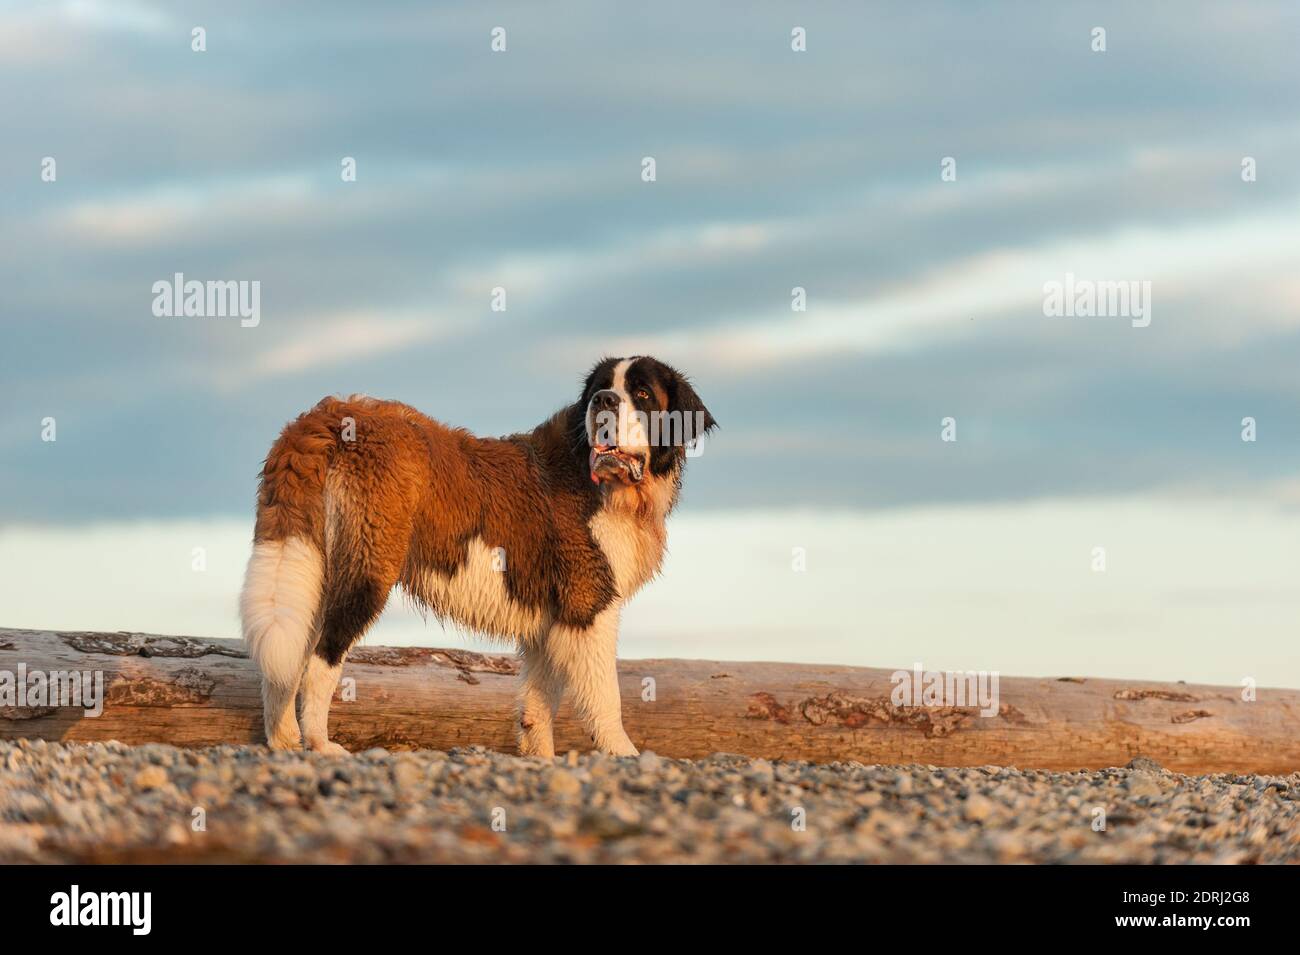 Dog Standing At Beach Against Cloudy Sky Stock Photo